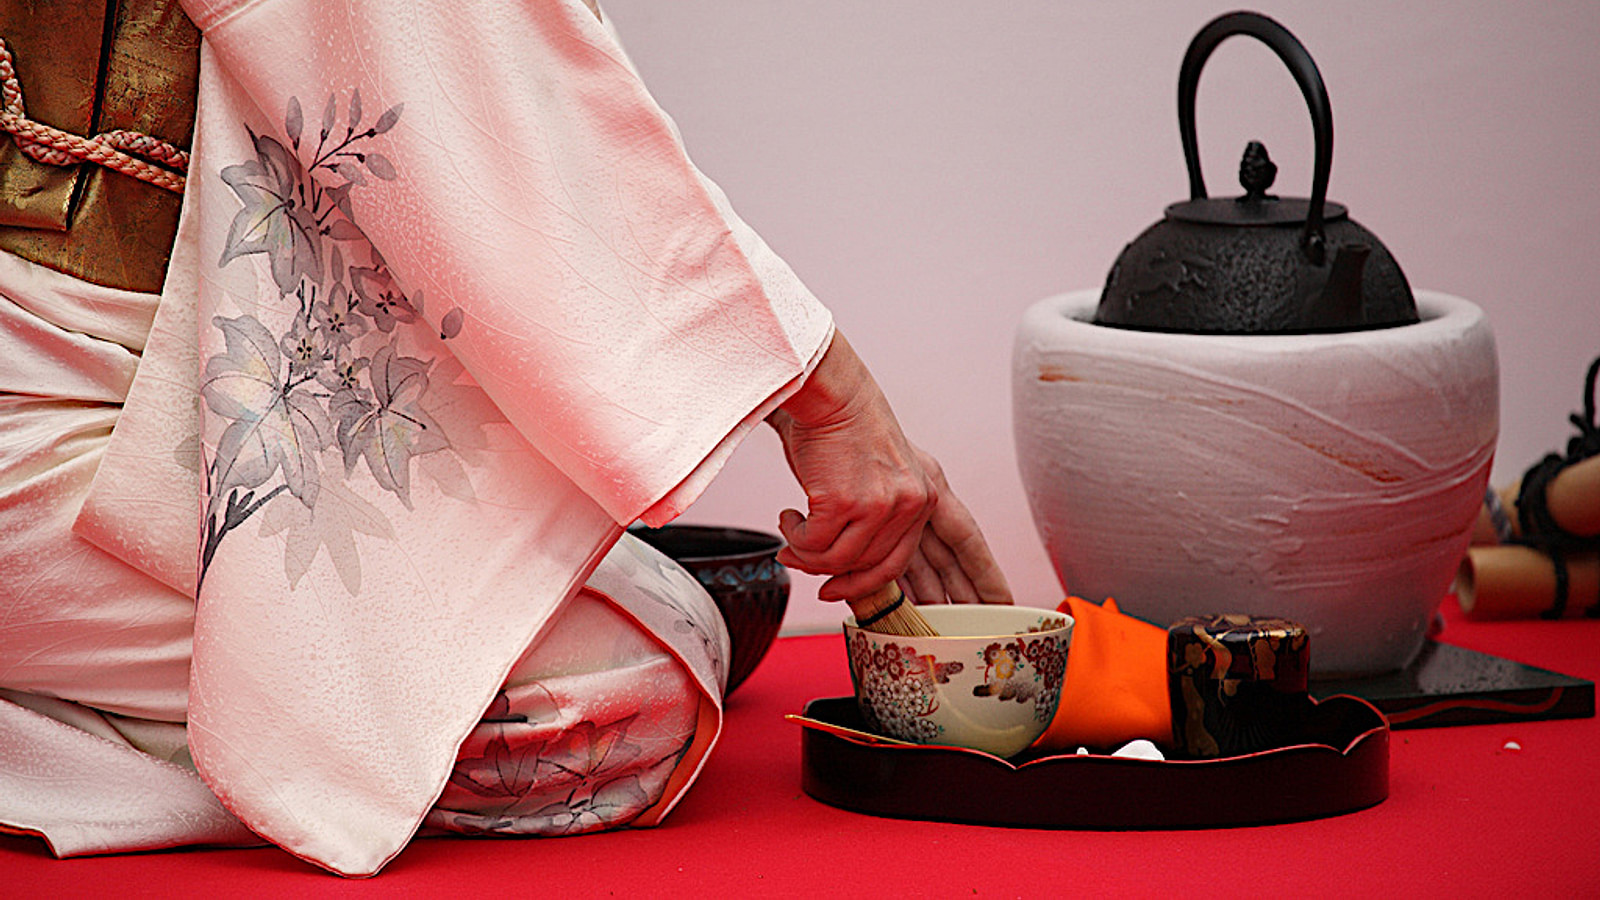 Japanese Teapot: 8 Things You Need to Know